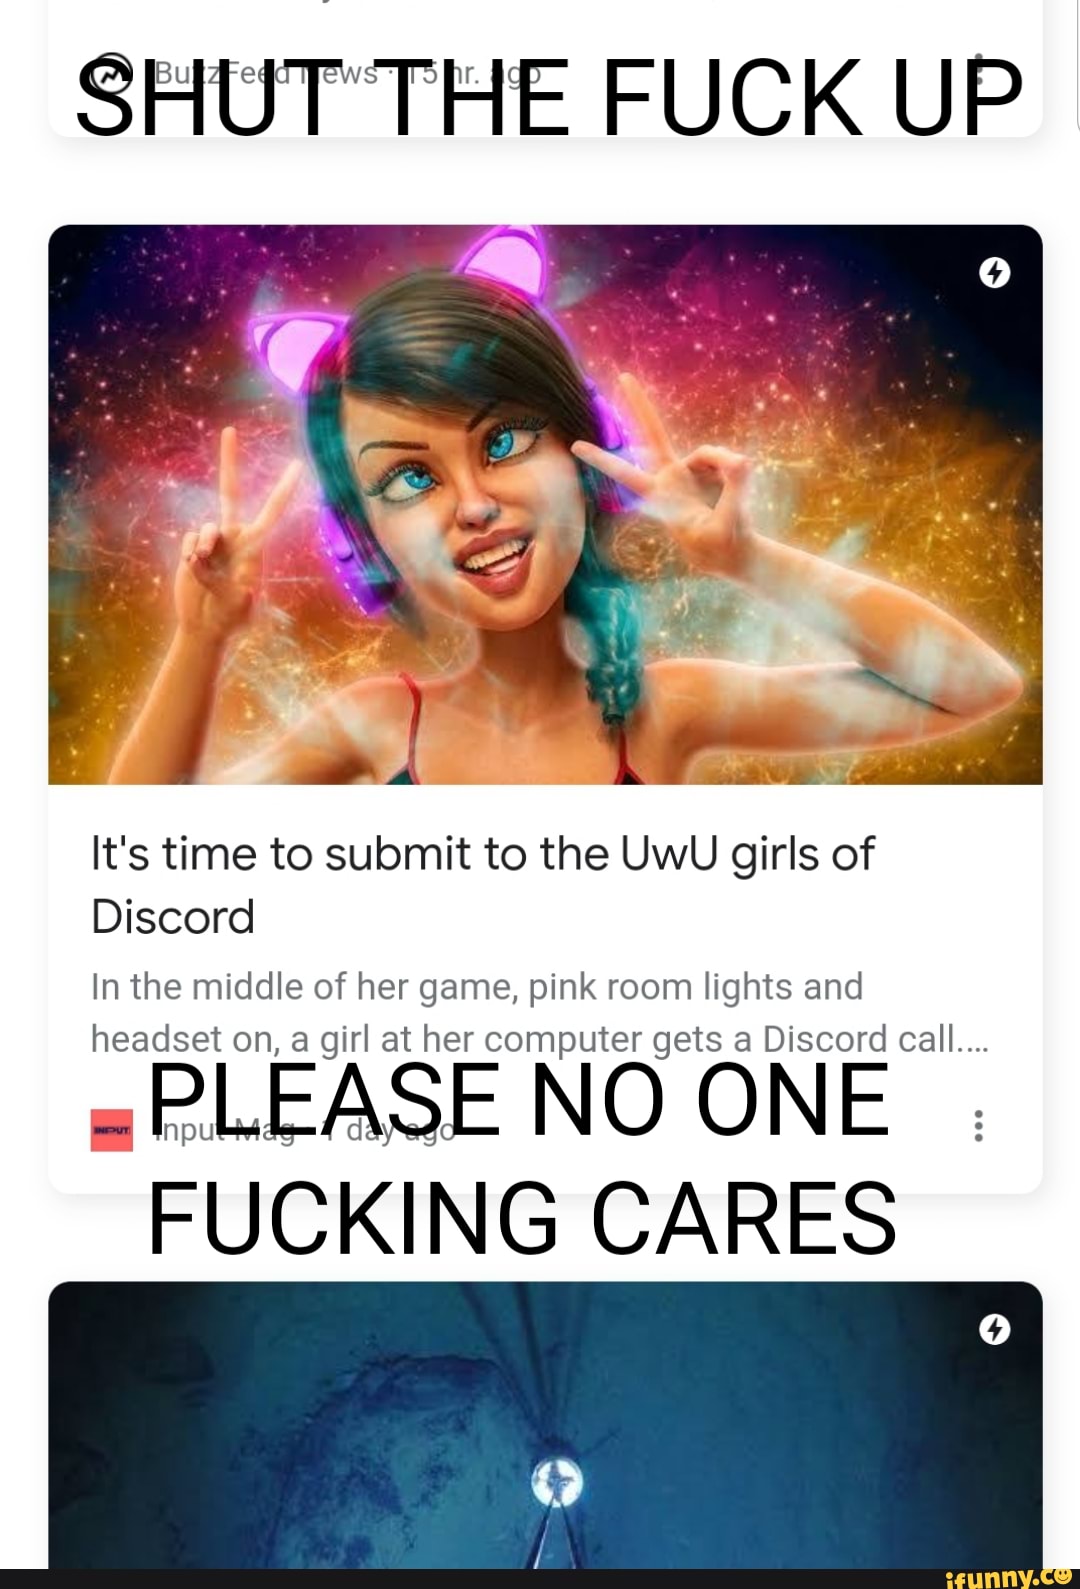 It's time to submit to the UwU girls of Discord